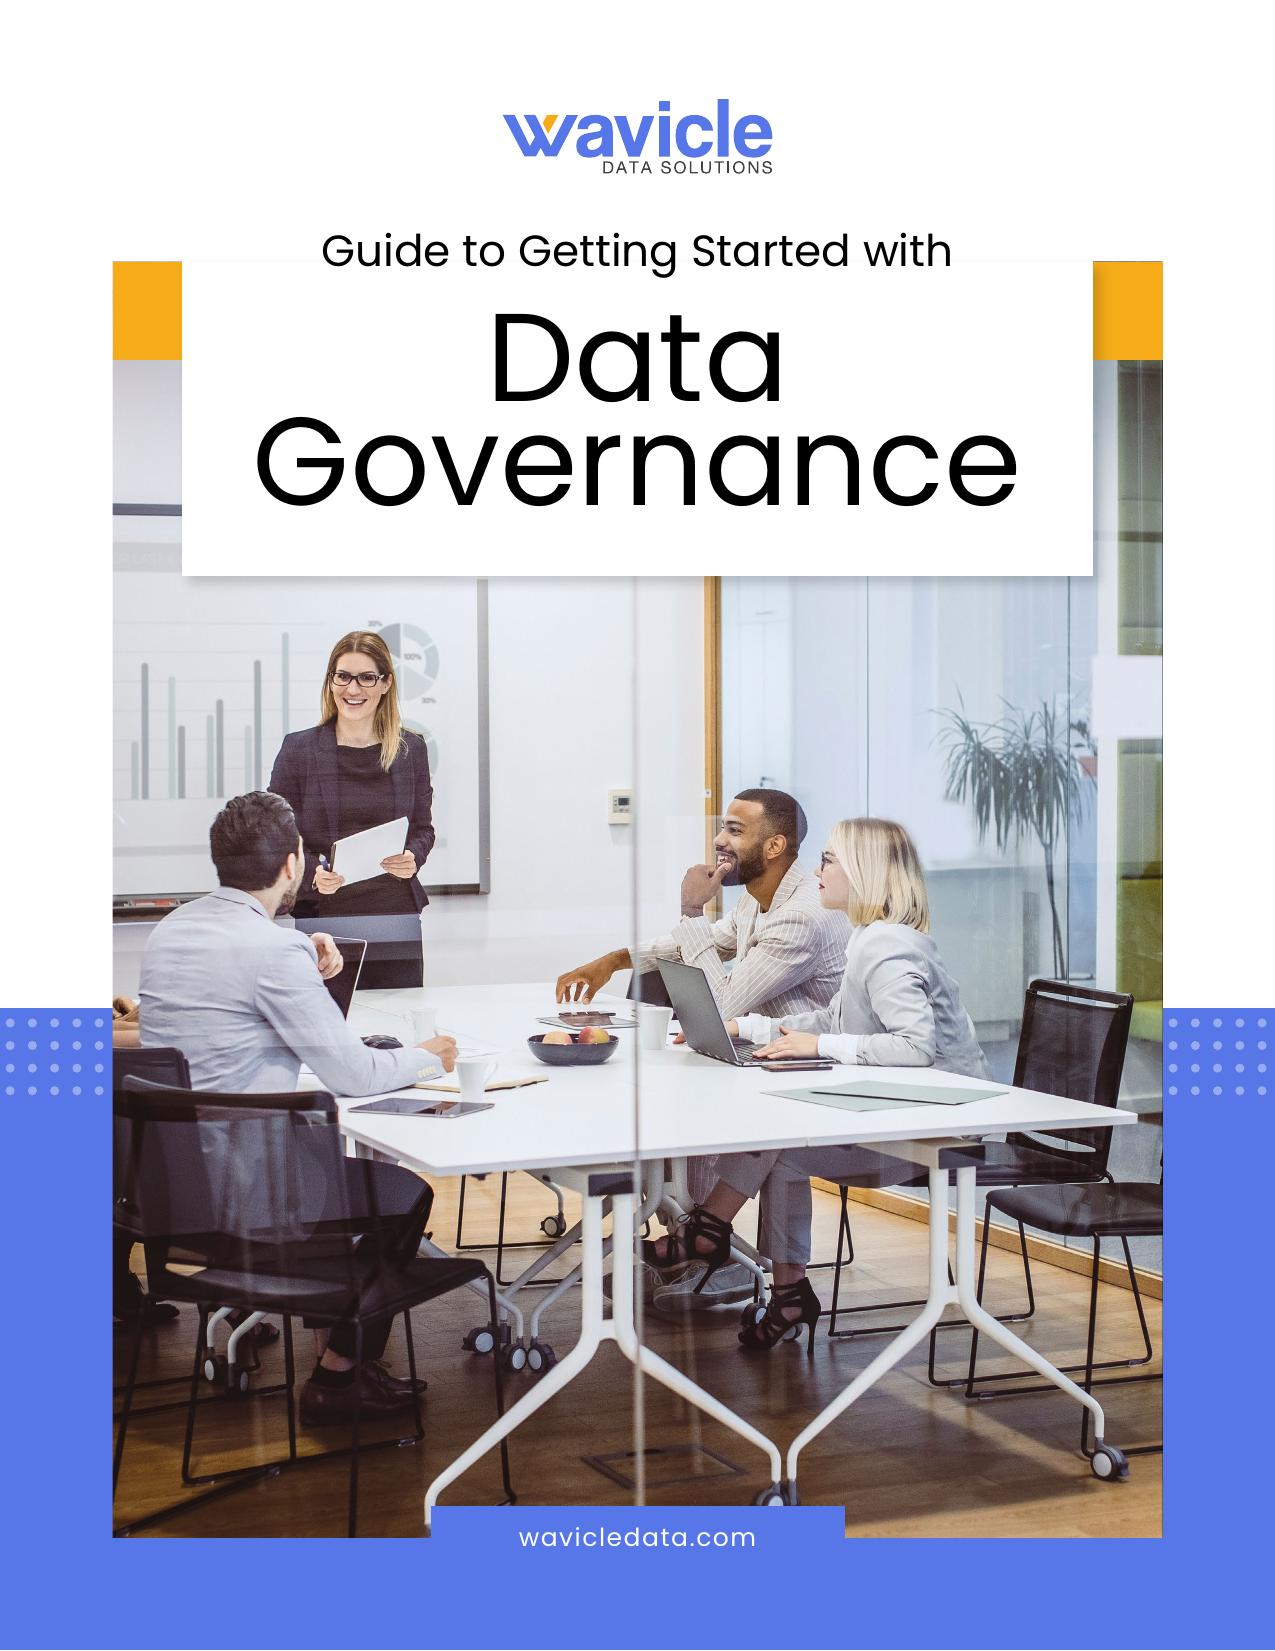 Guide to Data Governance